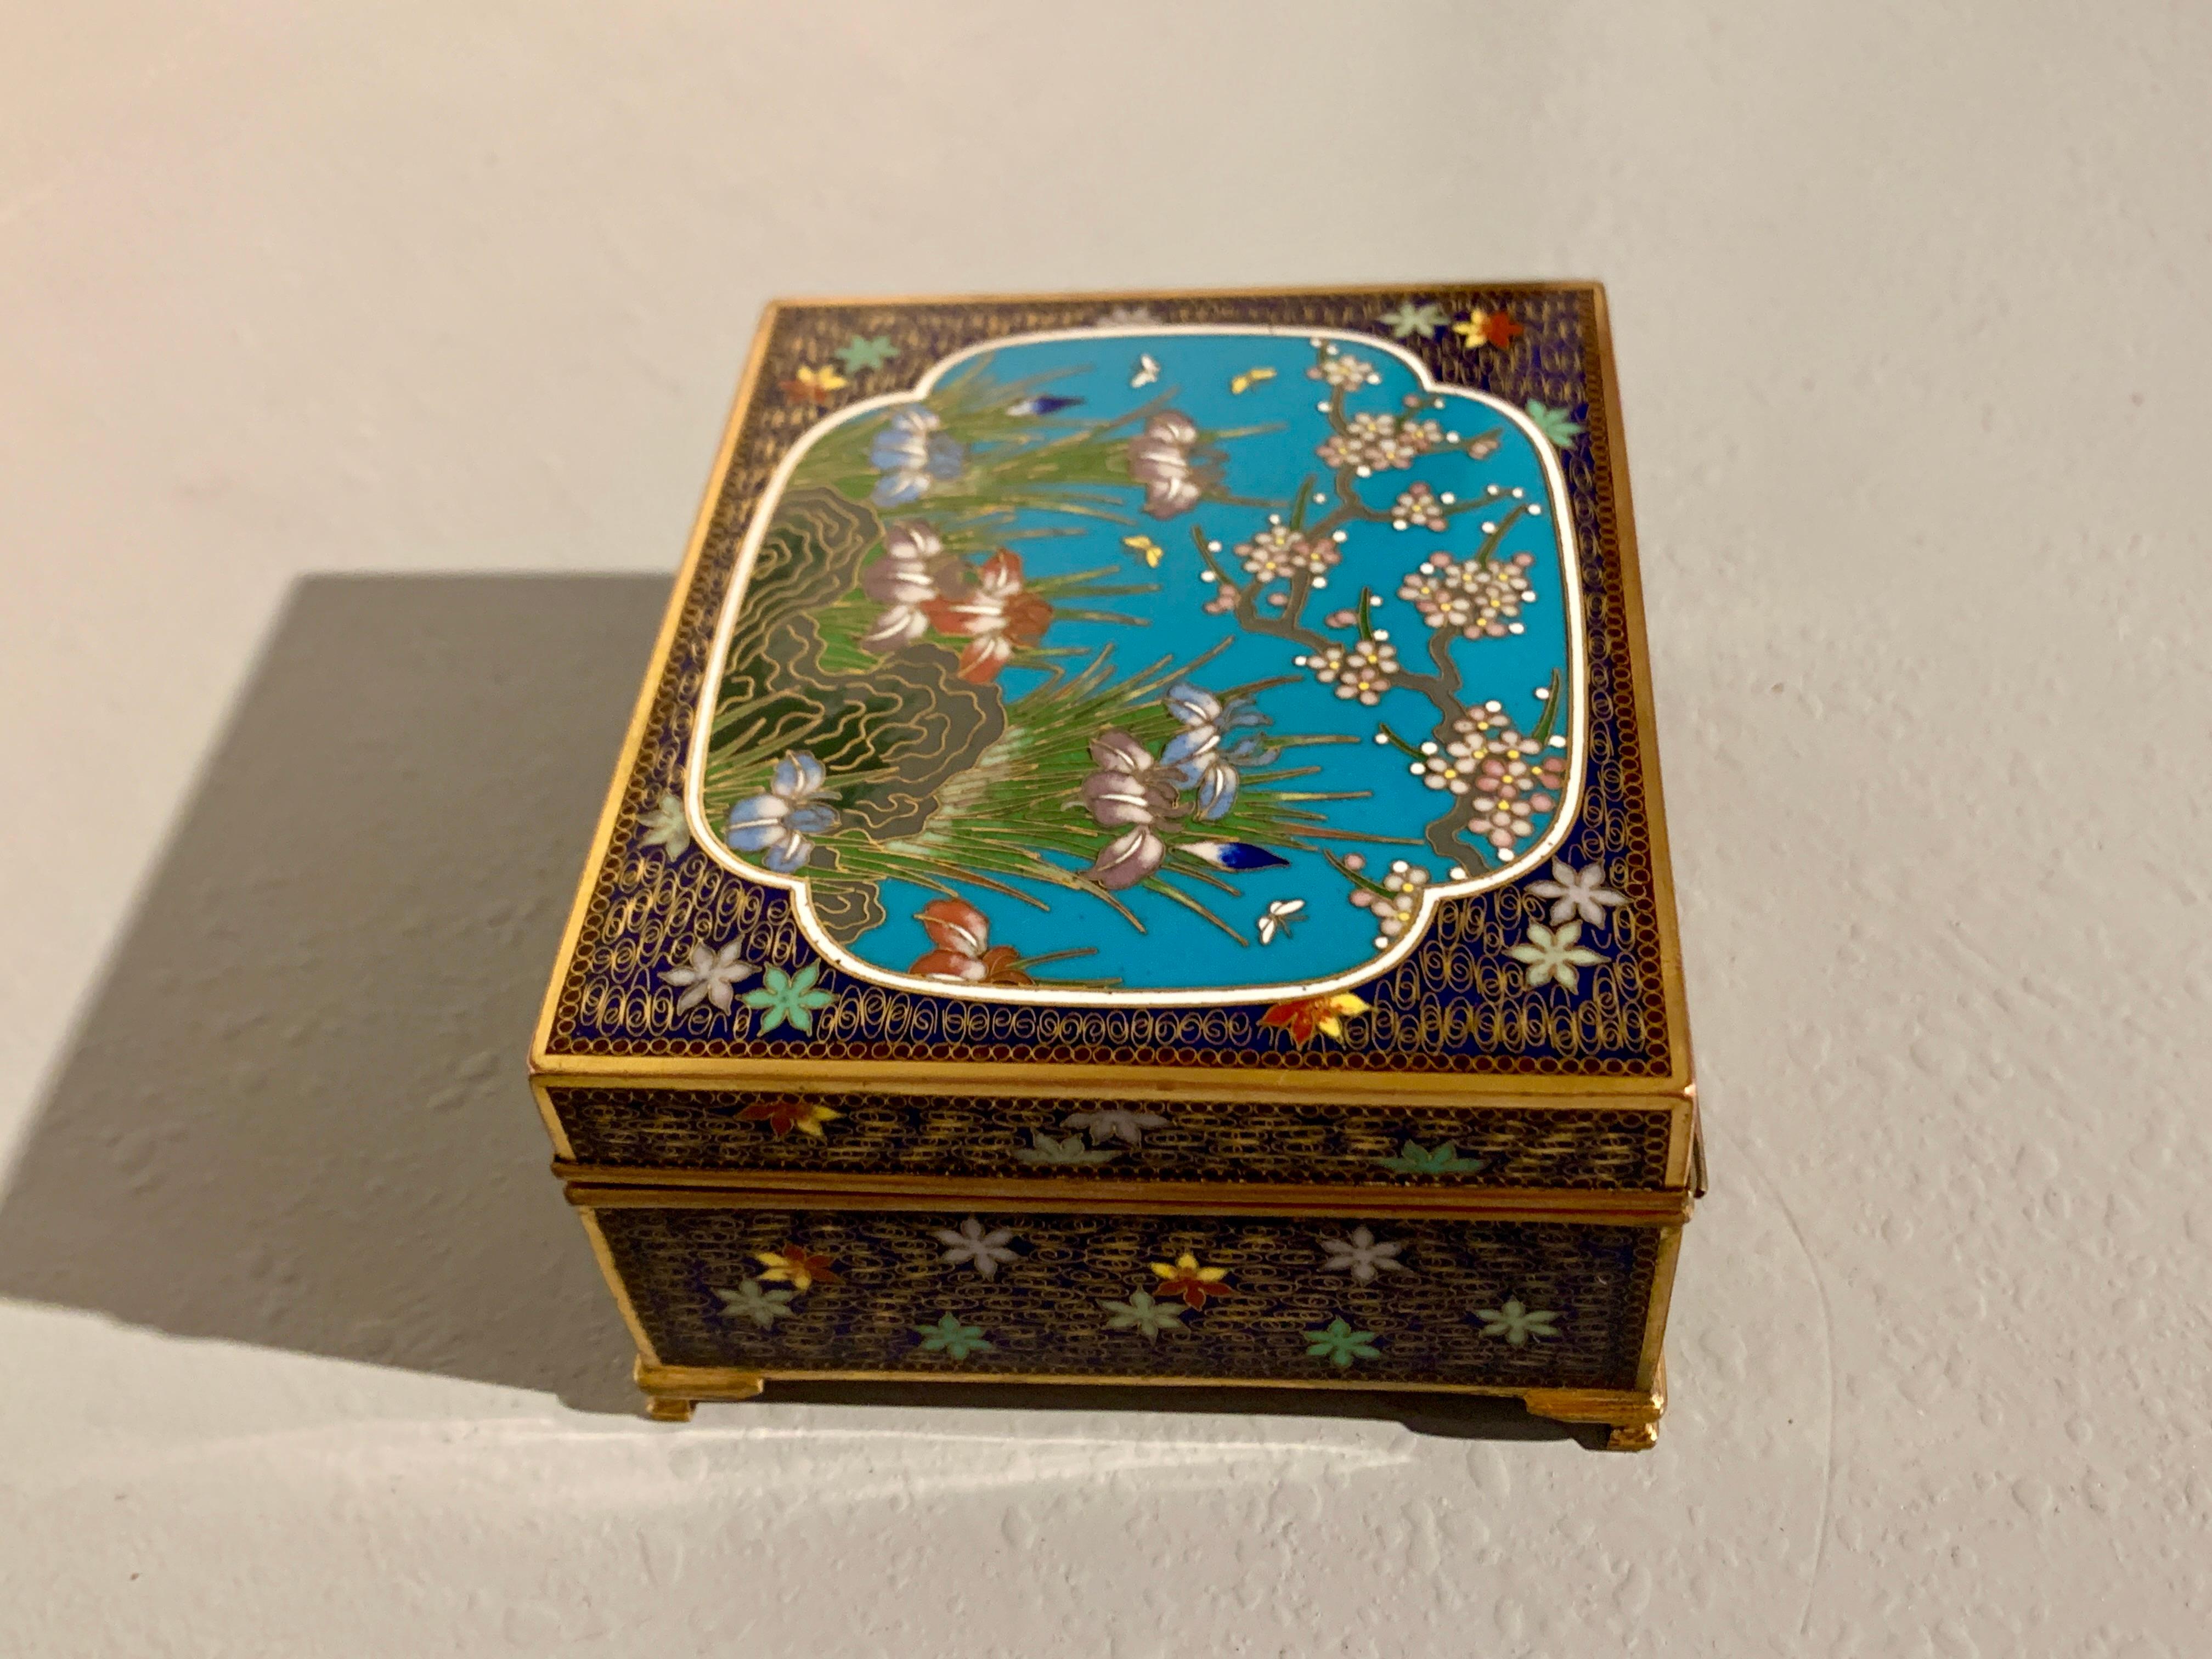 A delightful Japanese cloisonne trinket box with iris and cherry blossom design, Meiji Period, circa 1900, Japan.

The lovely box decorated in the cloisonne enamel technique. The hinged top features a large central quatrefoil reserve with irises,